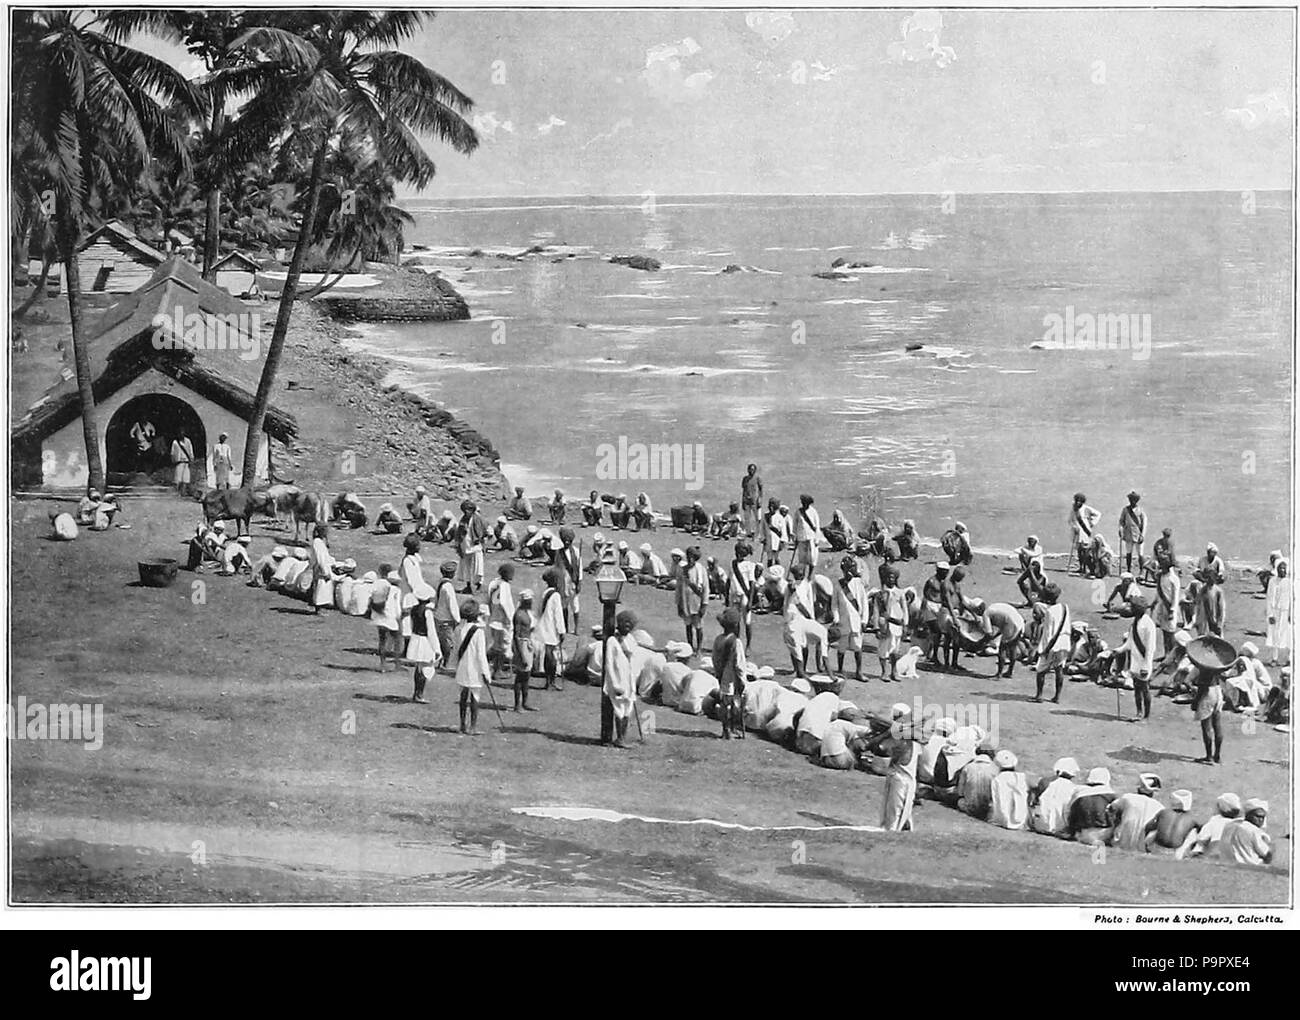 . PRISONERS IN THE ANDAMAN ISLANDS. The little group of the Andaman Islands lies in the Bay of Bengal, some six hundred miles to the south of Calcutta. In 1858 a convict settlement was established at Port Blair, on the principal island, and to it were sent a large number of the Sepoy mutineers. The island has now become a general convict station for prisoners under life-sentences. It is a group of these men that we see in our illustration assembled on the shore for their mid-day meal. It was at Port Blair that Lord Mayo, Viceroy of India, was treacherously murdered by one of the convicts in th Stock Photo